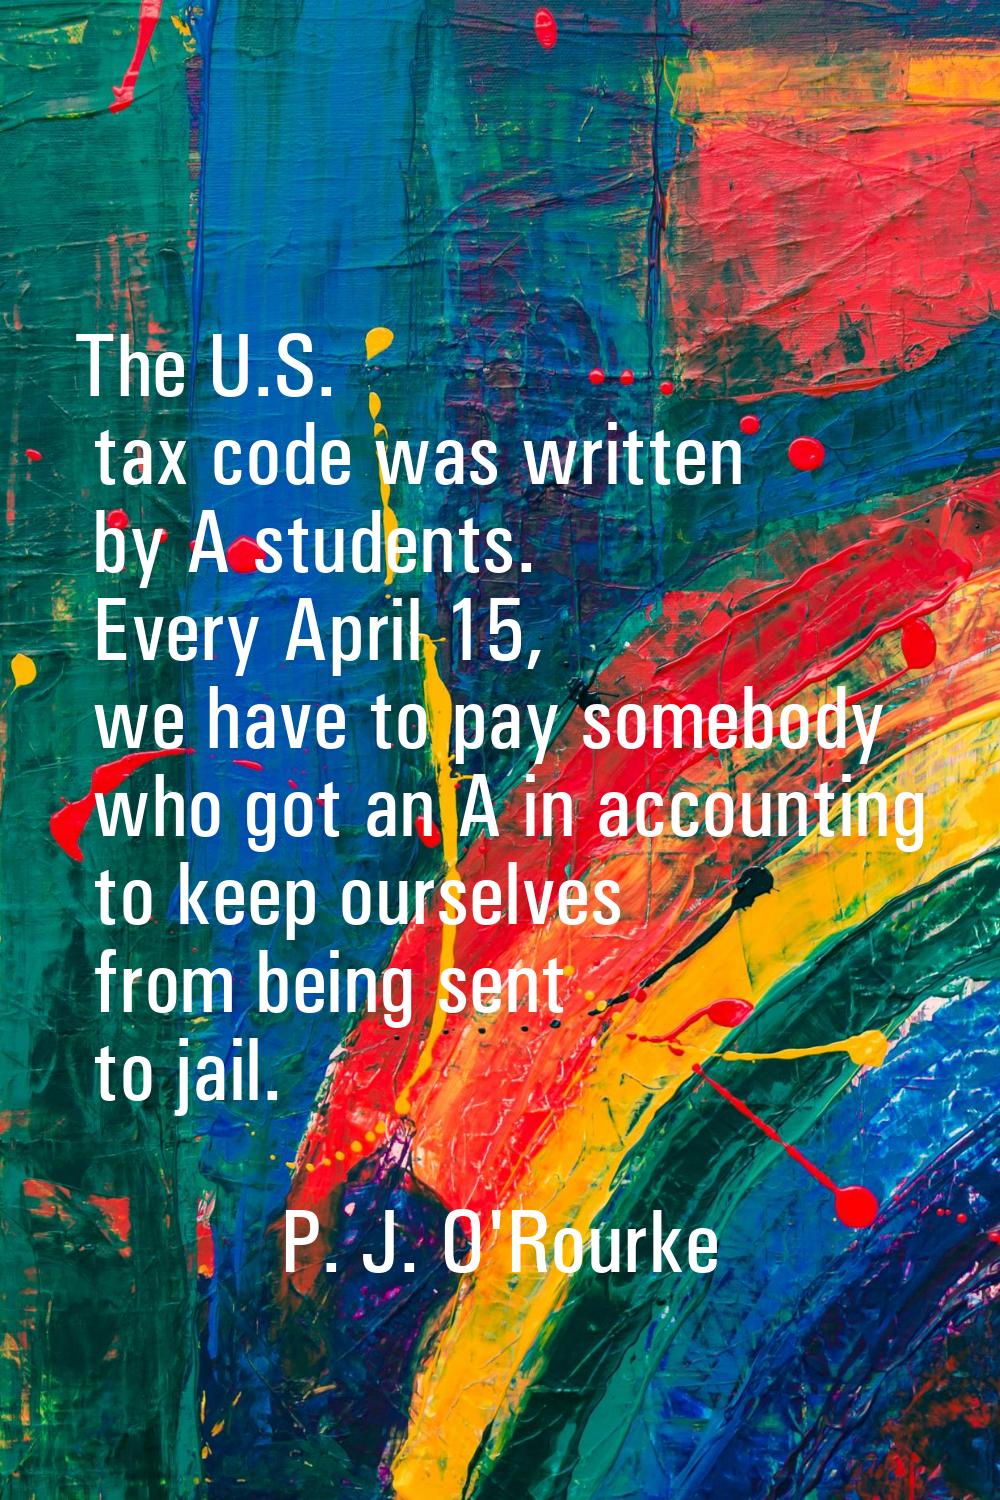 The U.S. tax code was written by A students. Every April 15, we have to pay somebody who got an A i